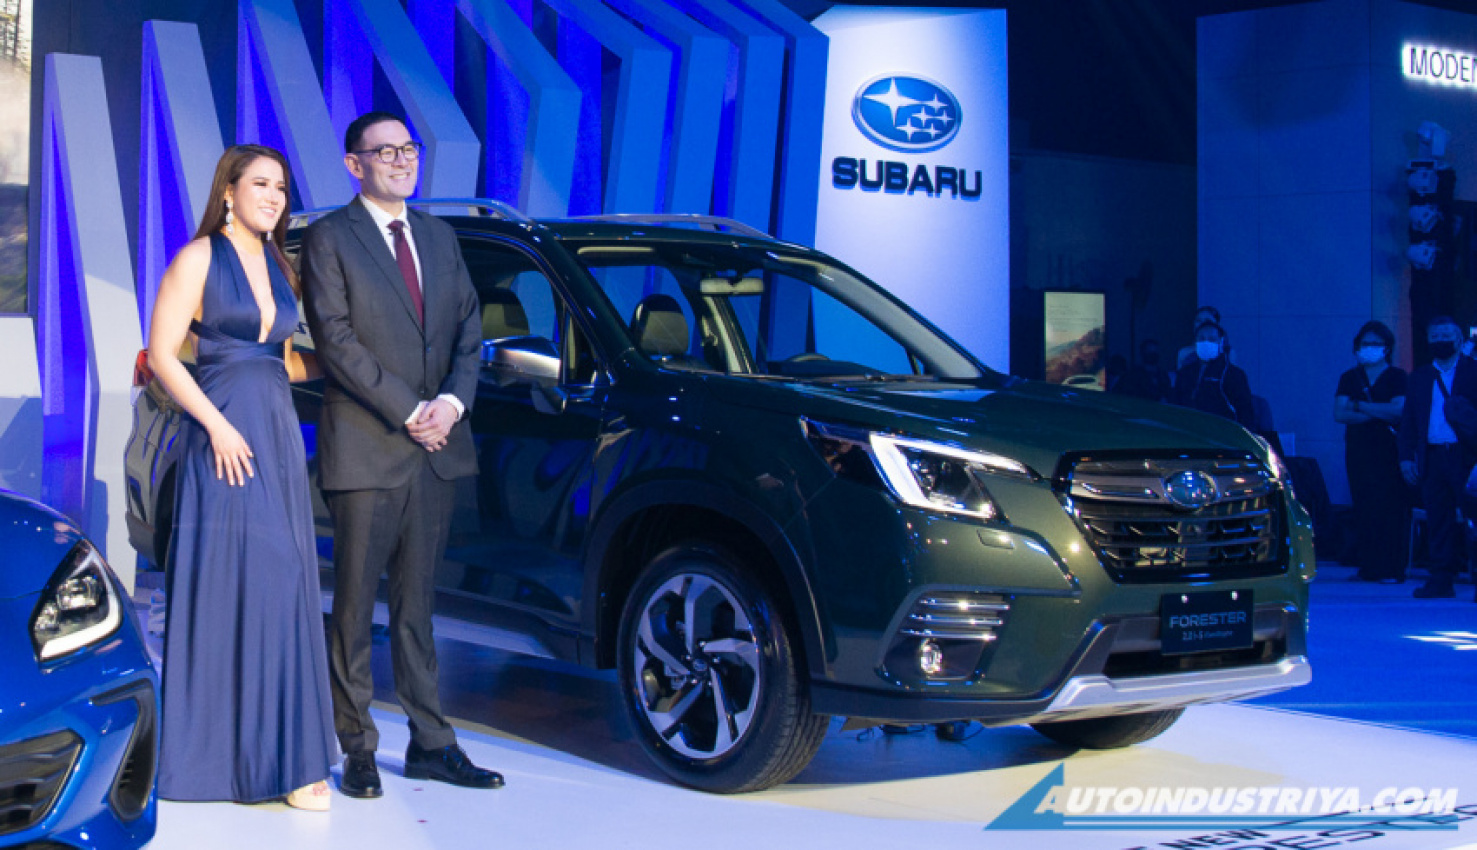 auto news, autos, cars, subaru, android, mias 2022, subaru eyesight, subaru forester, android, mias 2022: subaru forester launched with upgraded eyesight